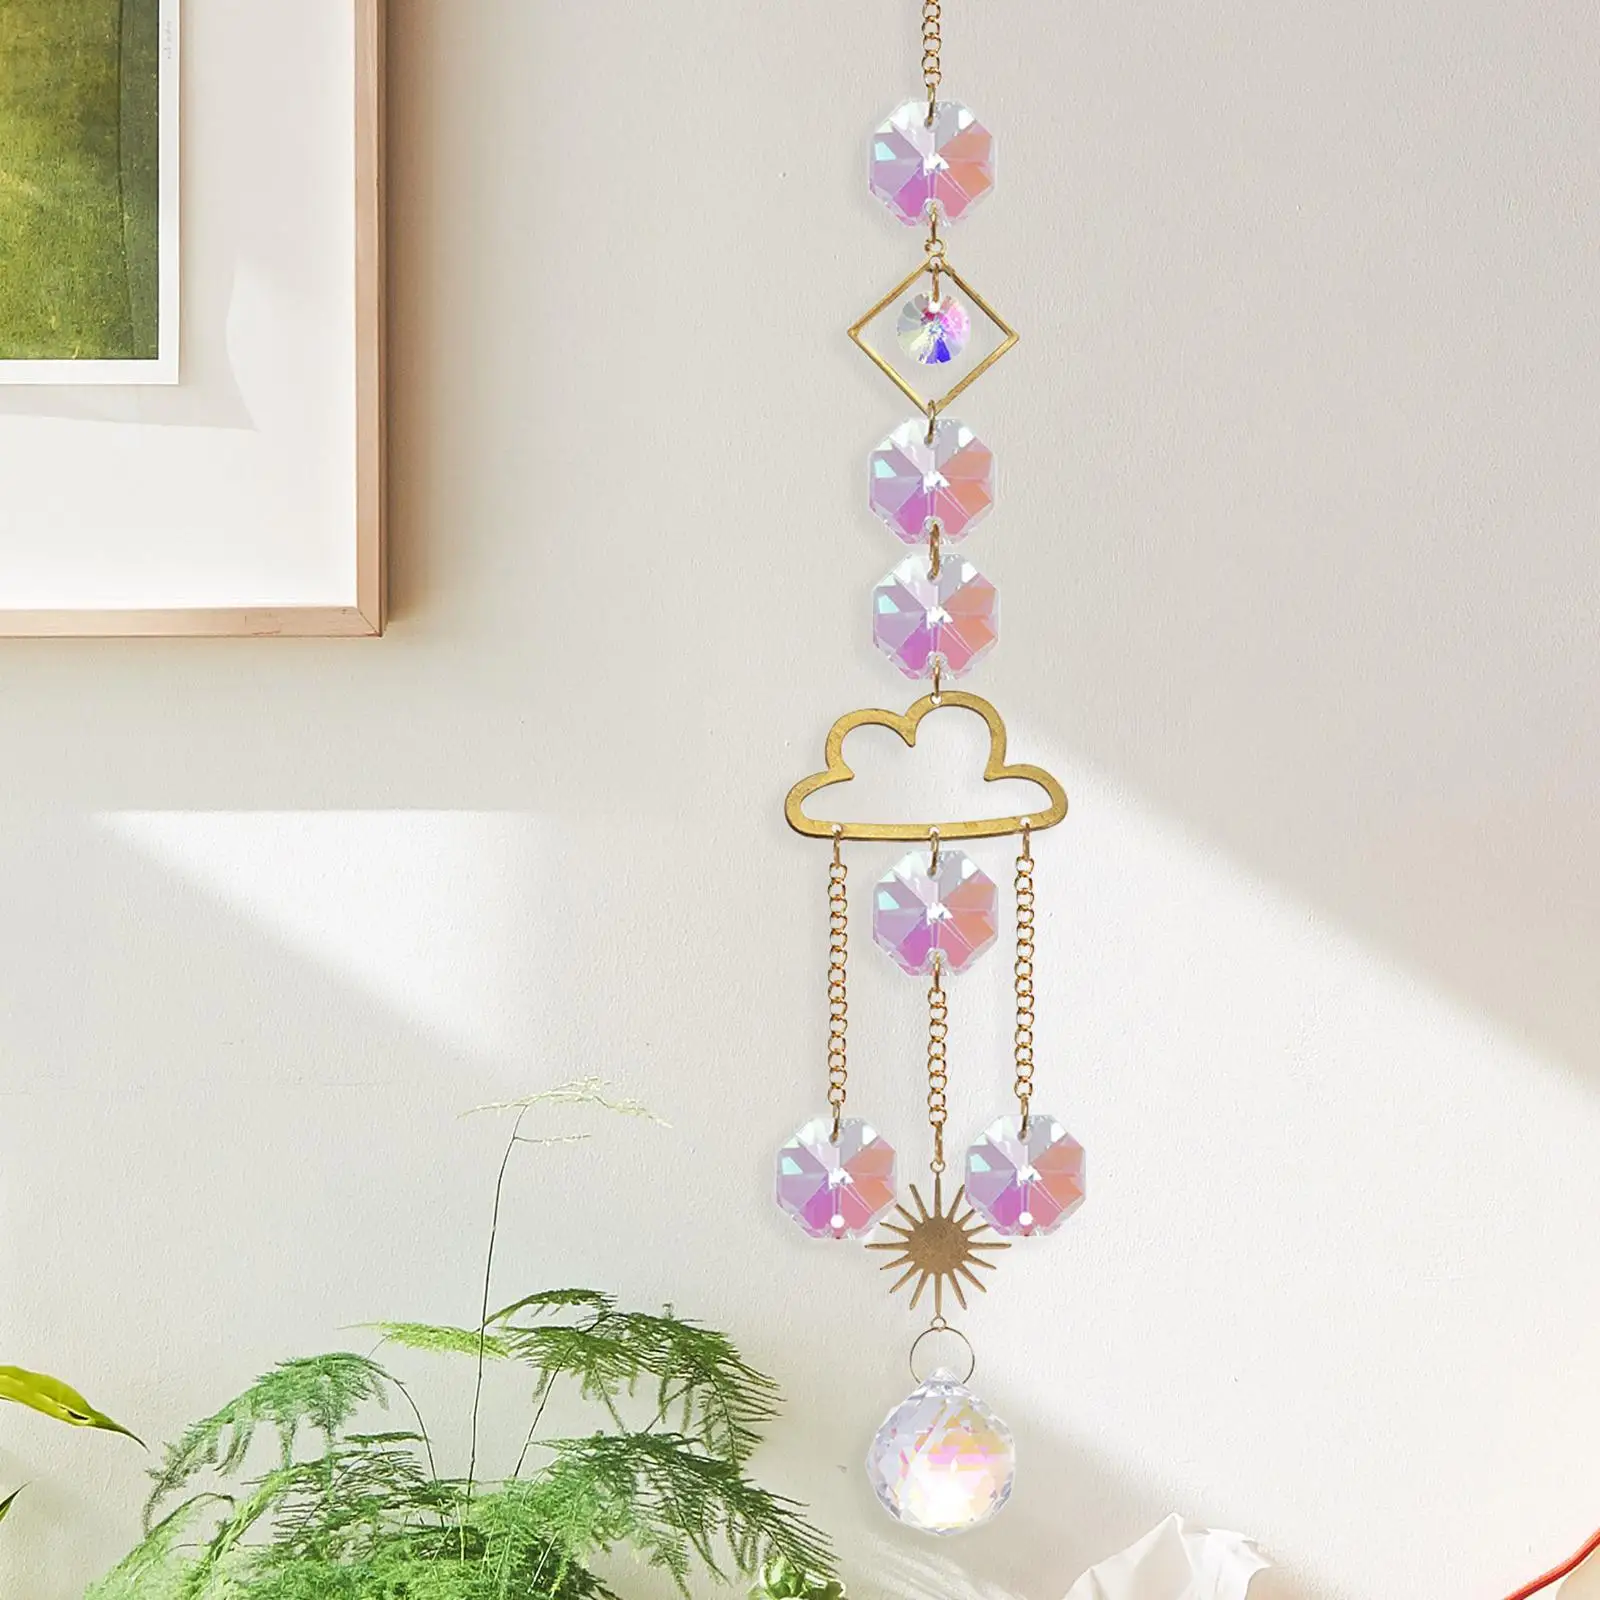 Hanging  Decor Ornaments  Gifts Decoration Pendant for Windows  Catching Yard Office